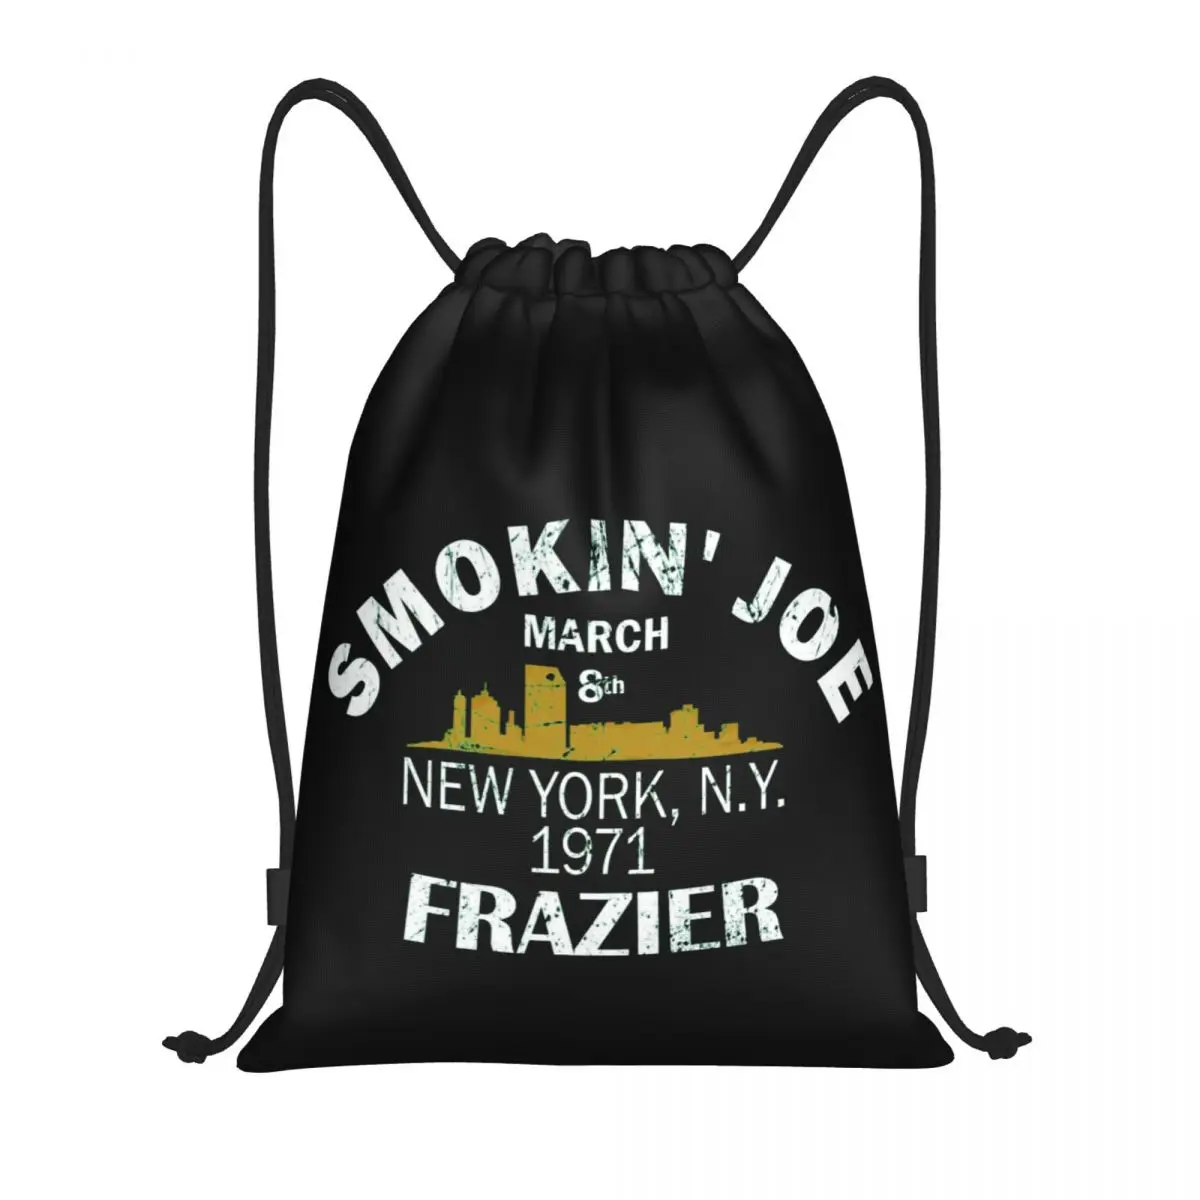 

US USA America 17 Joes And Fraziers Backpack Funny Geek Drawstring Backpack Drawstring Bags Gym Bag Novelty Travel